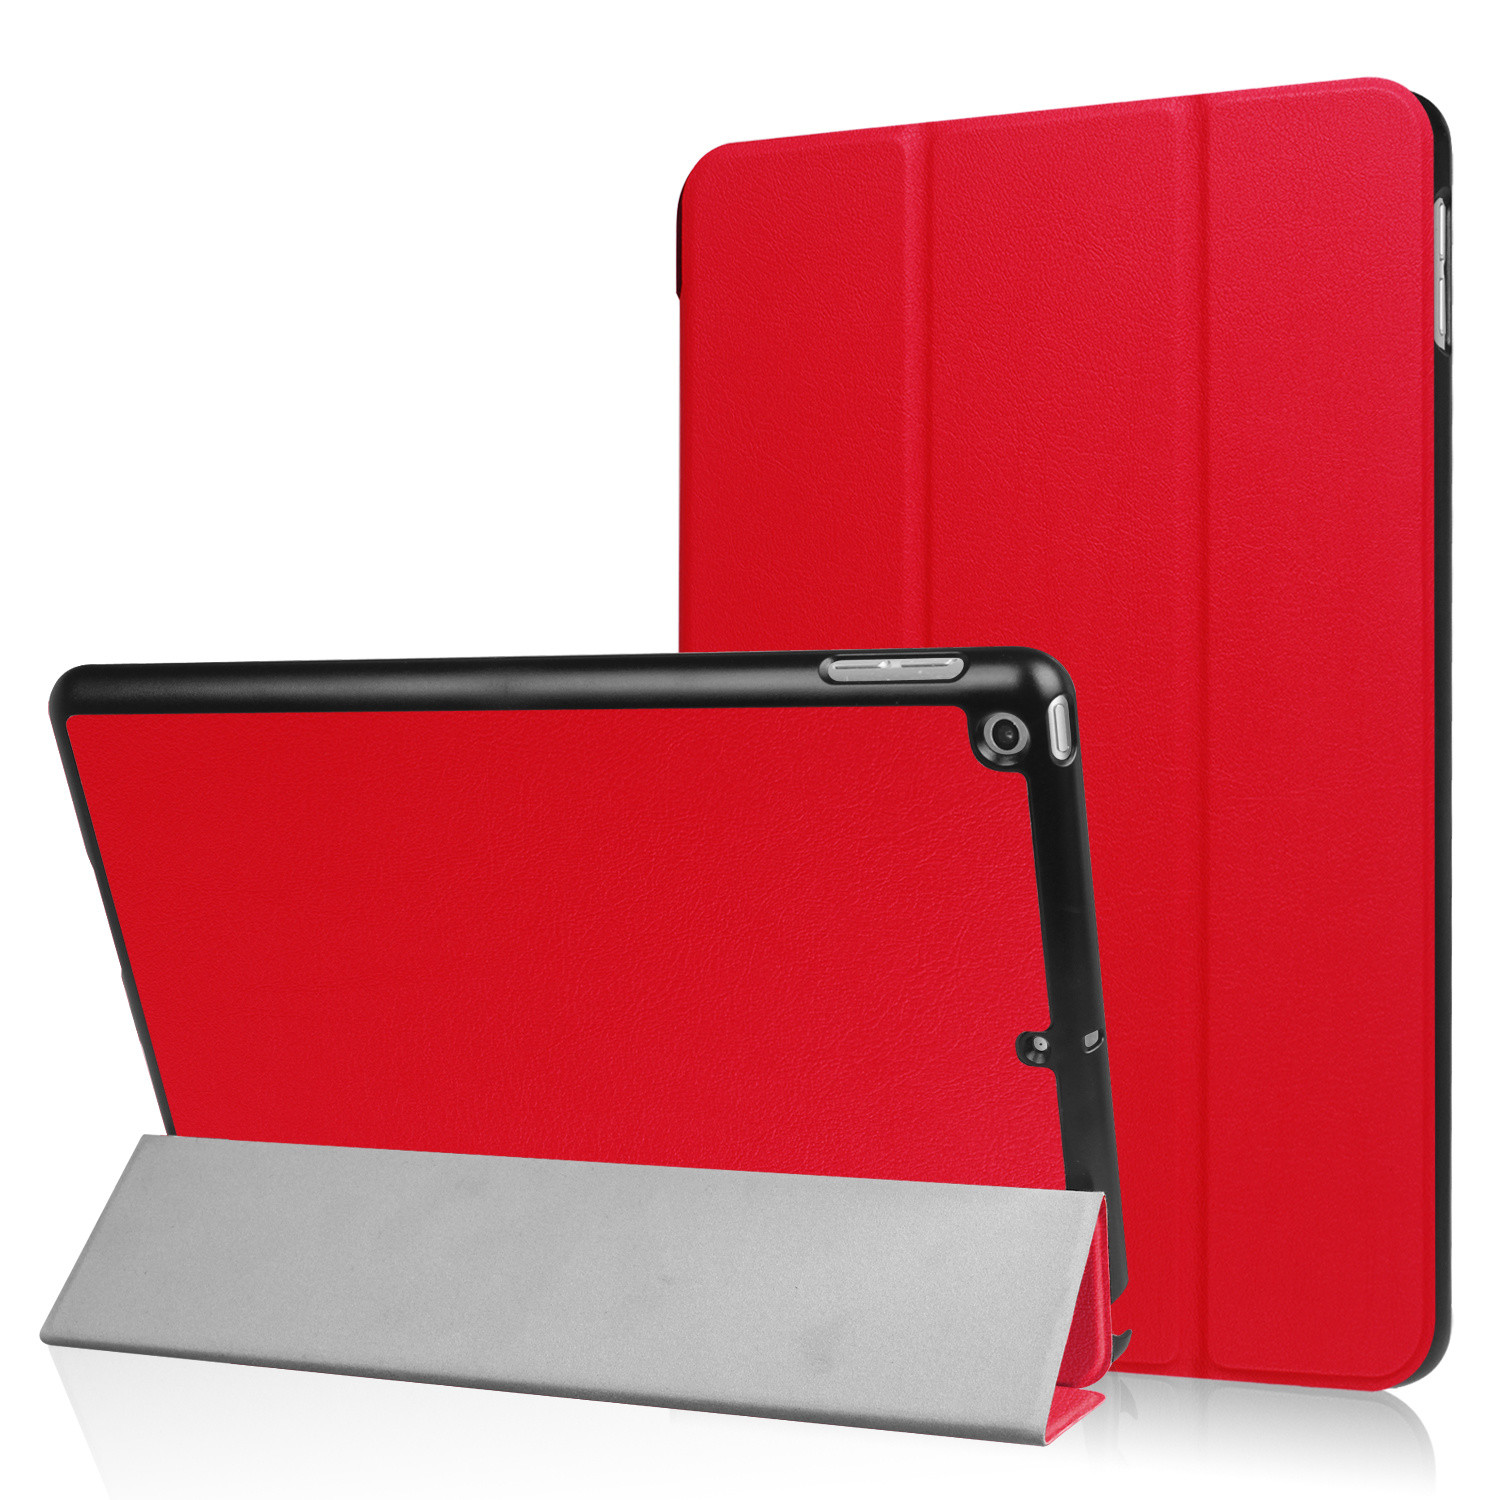 3-Vouw sleepcover hoes - iPad 9.7 (2017/2018) - Rood